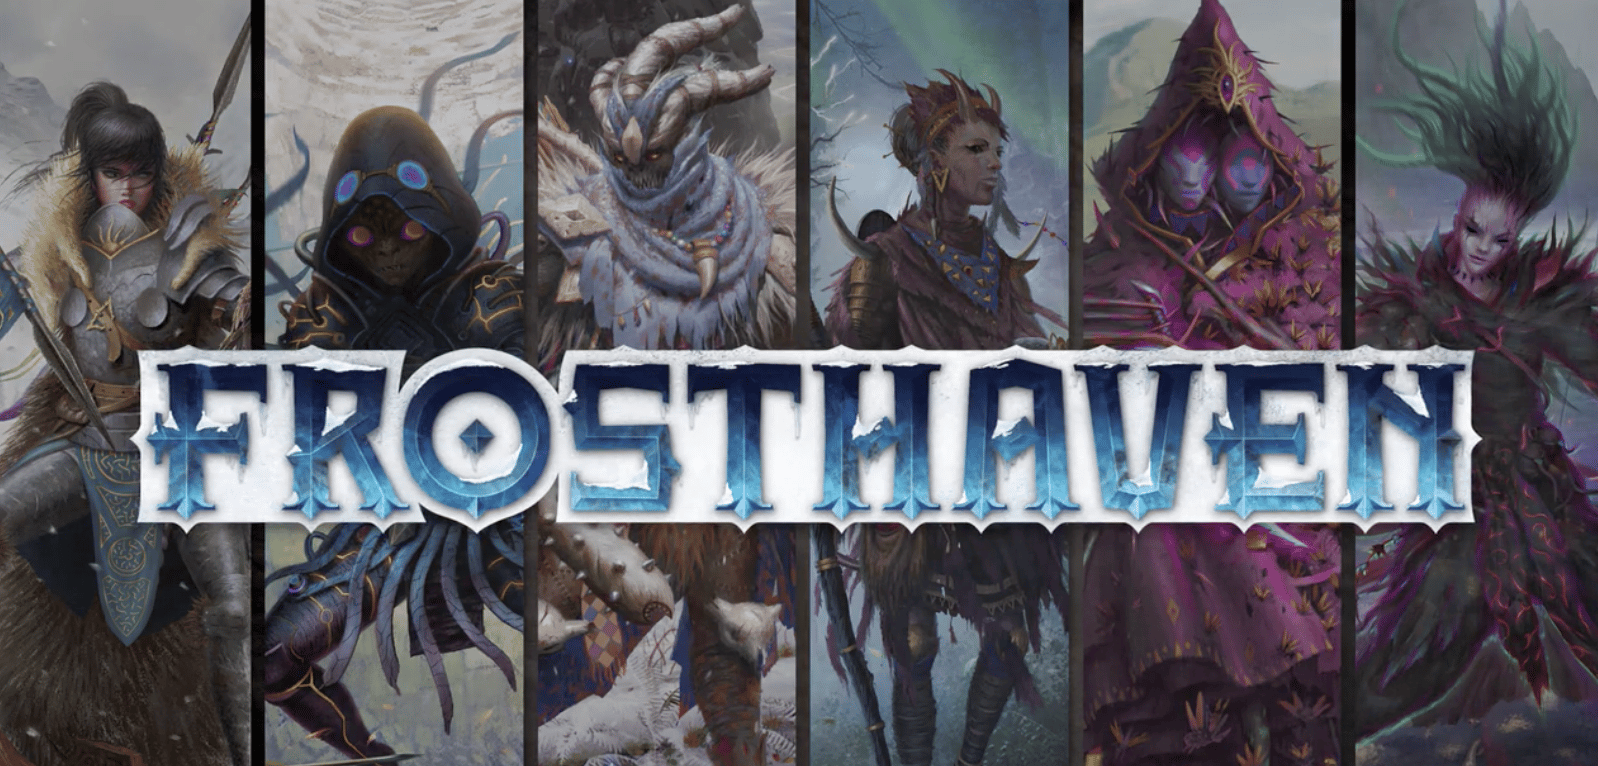 Frosthaven is one of the most successful kickstarter campaigns